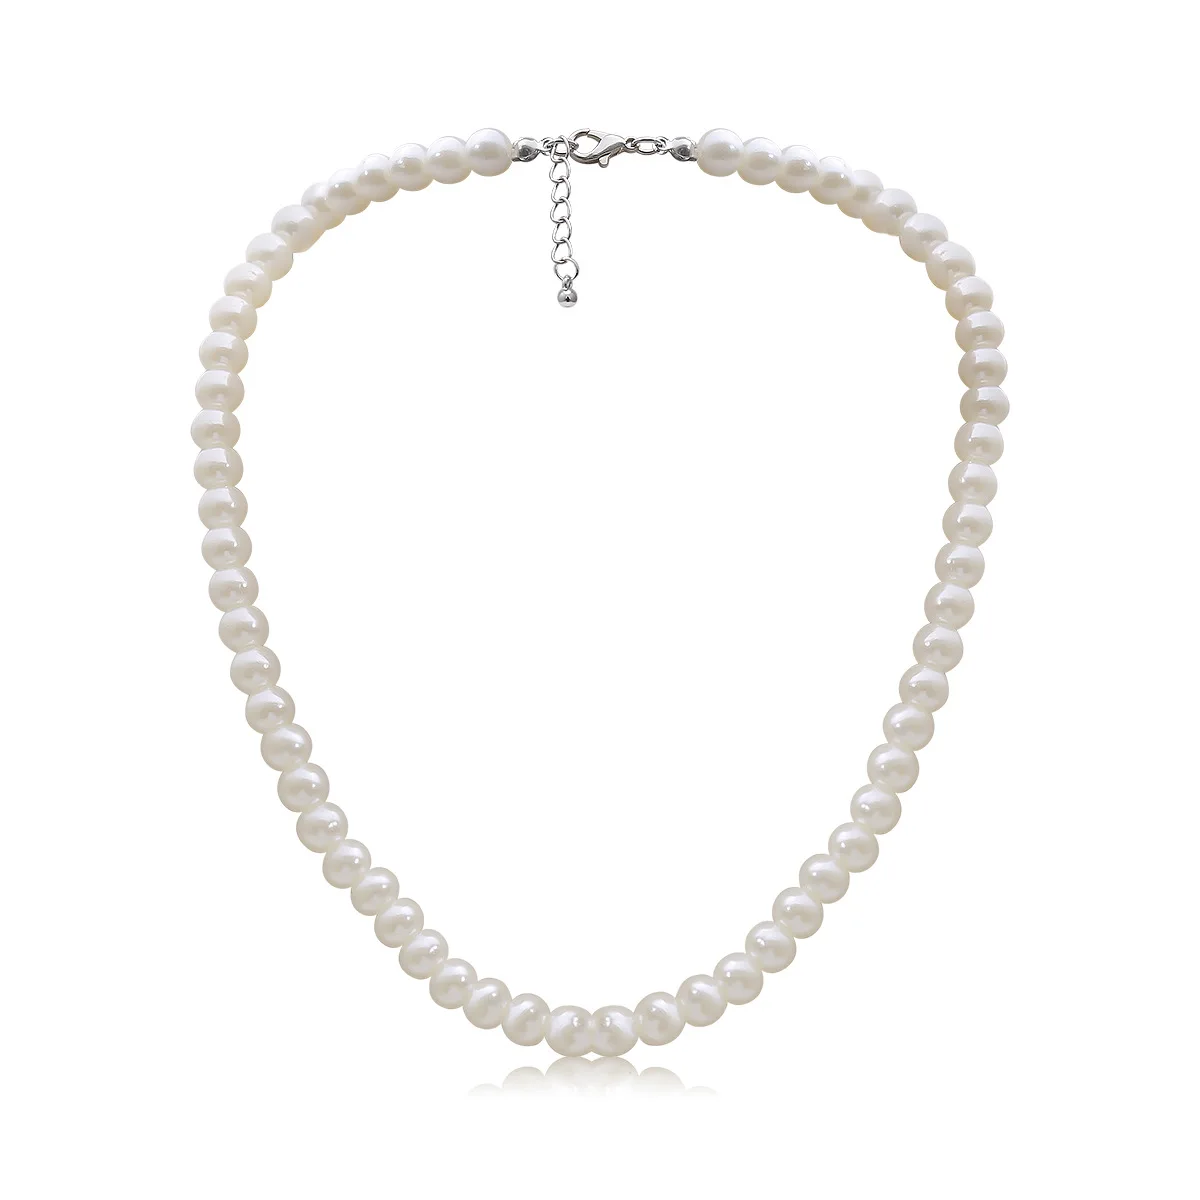 

VRIUA Fine Chokers Necklace Jewelry Simulated Pearl Necklace Fashion Statement Imitate Pearl Beads For Wedding Party Decoration, White